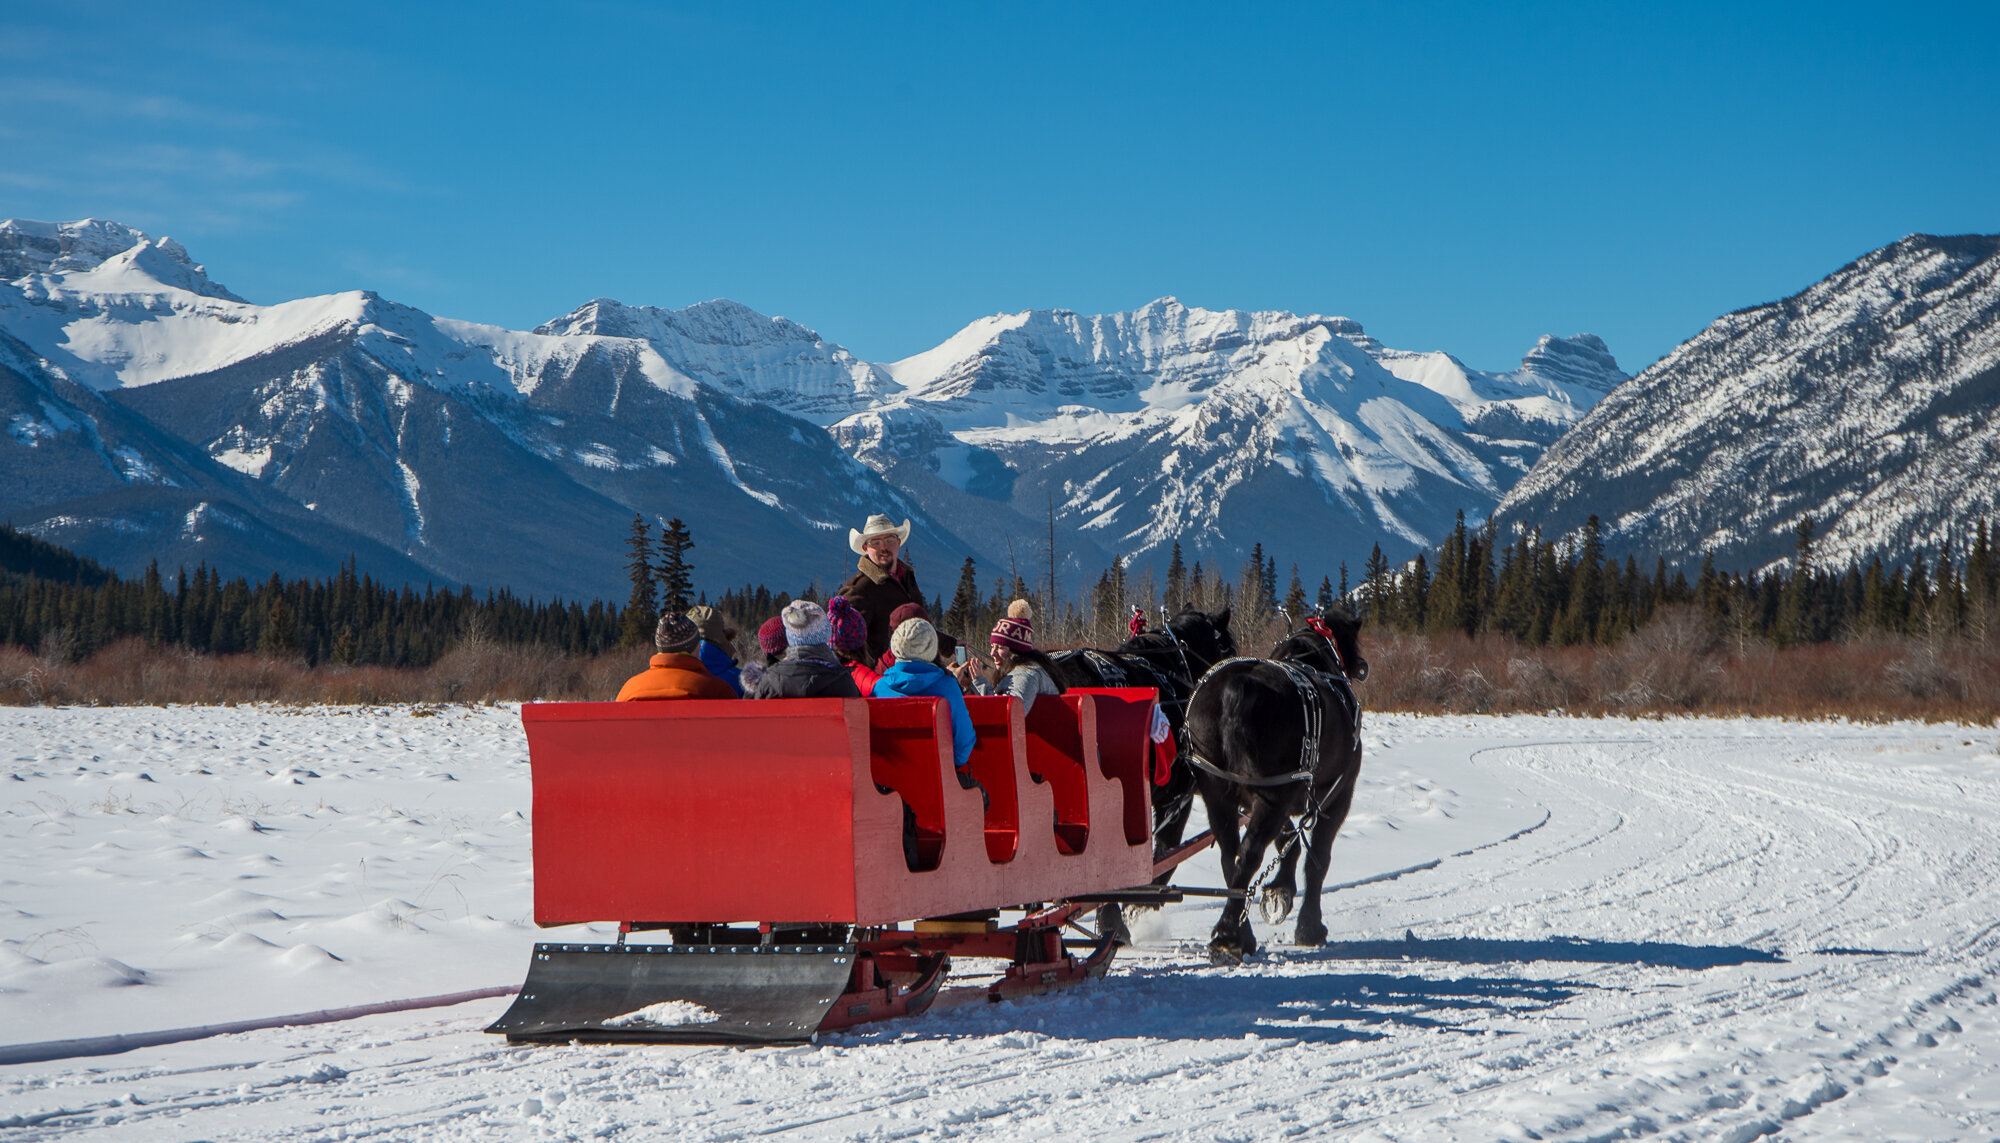 A sleigh ride on the open meadows in Banff